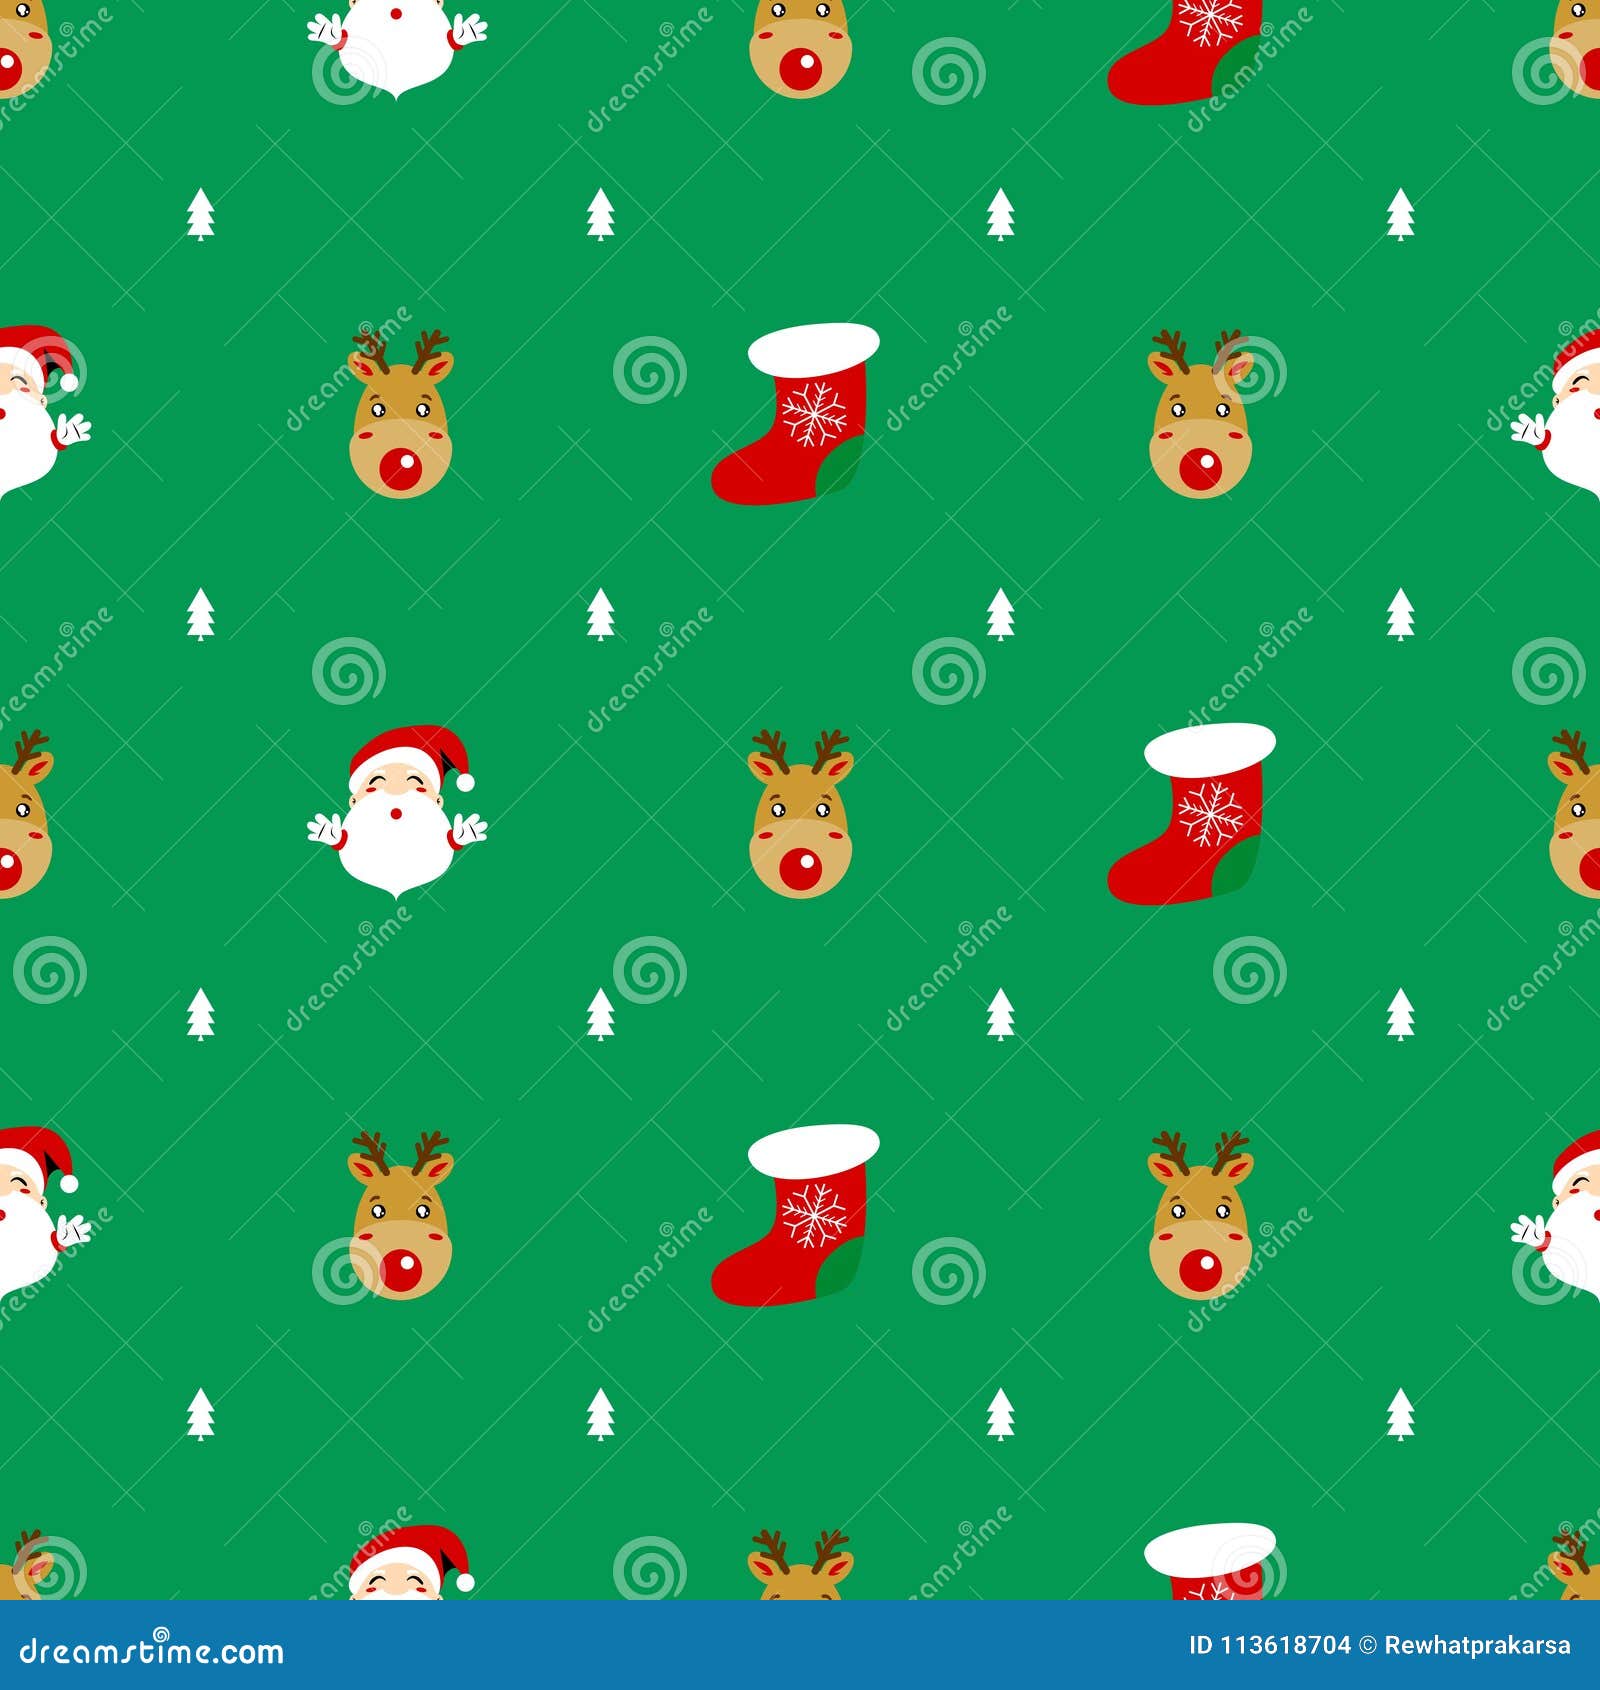 of santaclaus rudolph reindeer socks with red and white christmass tree pattern on green background